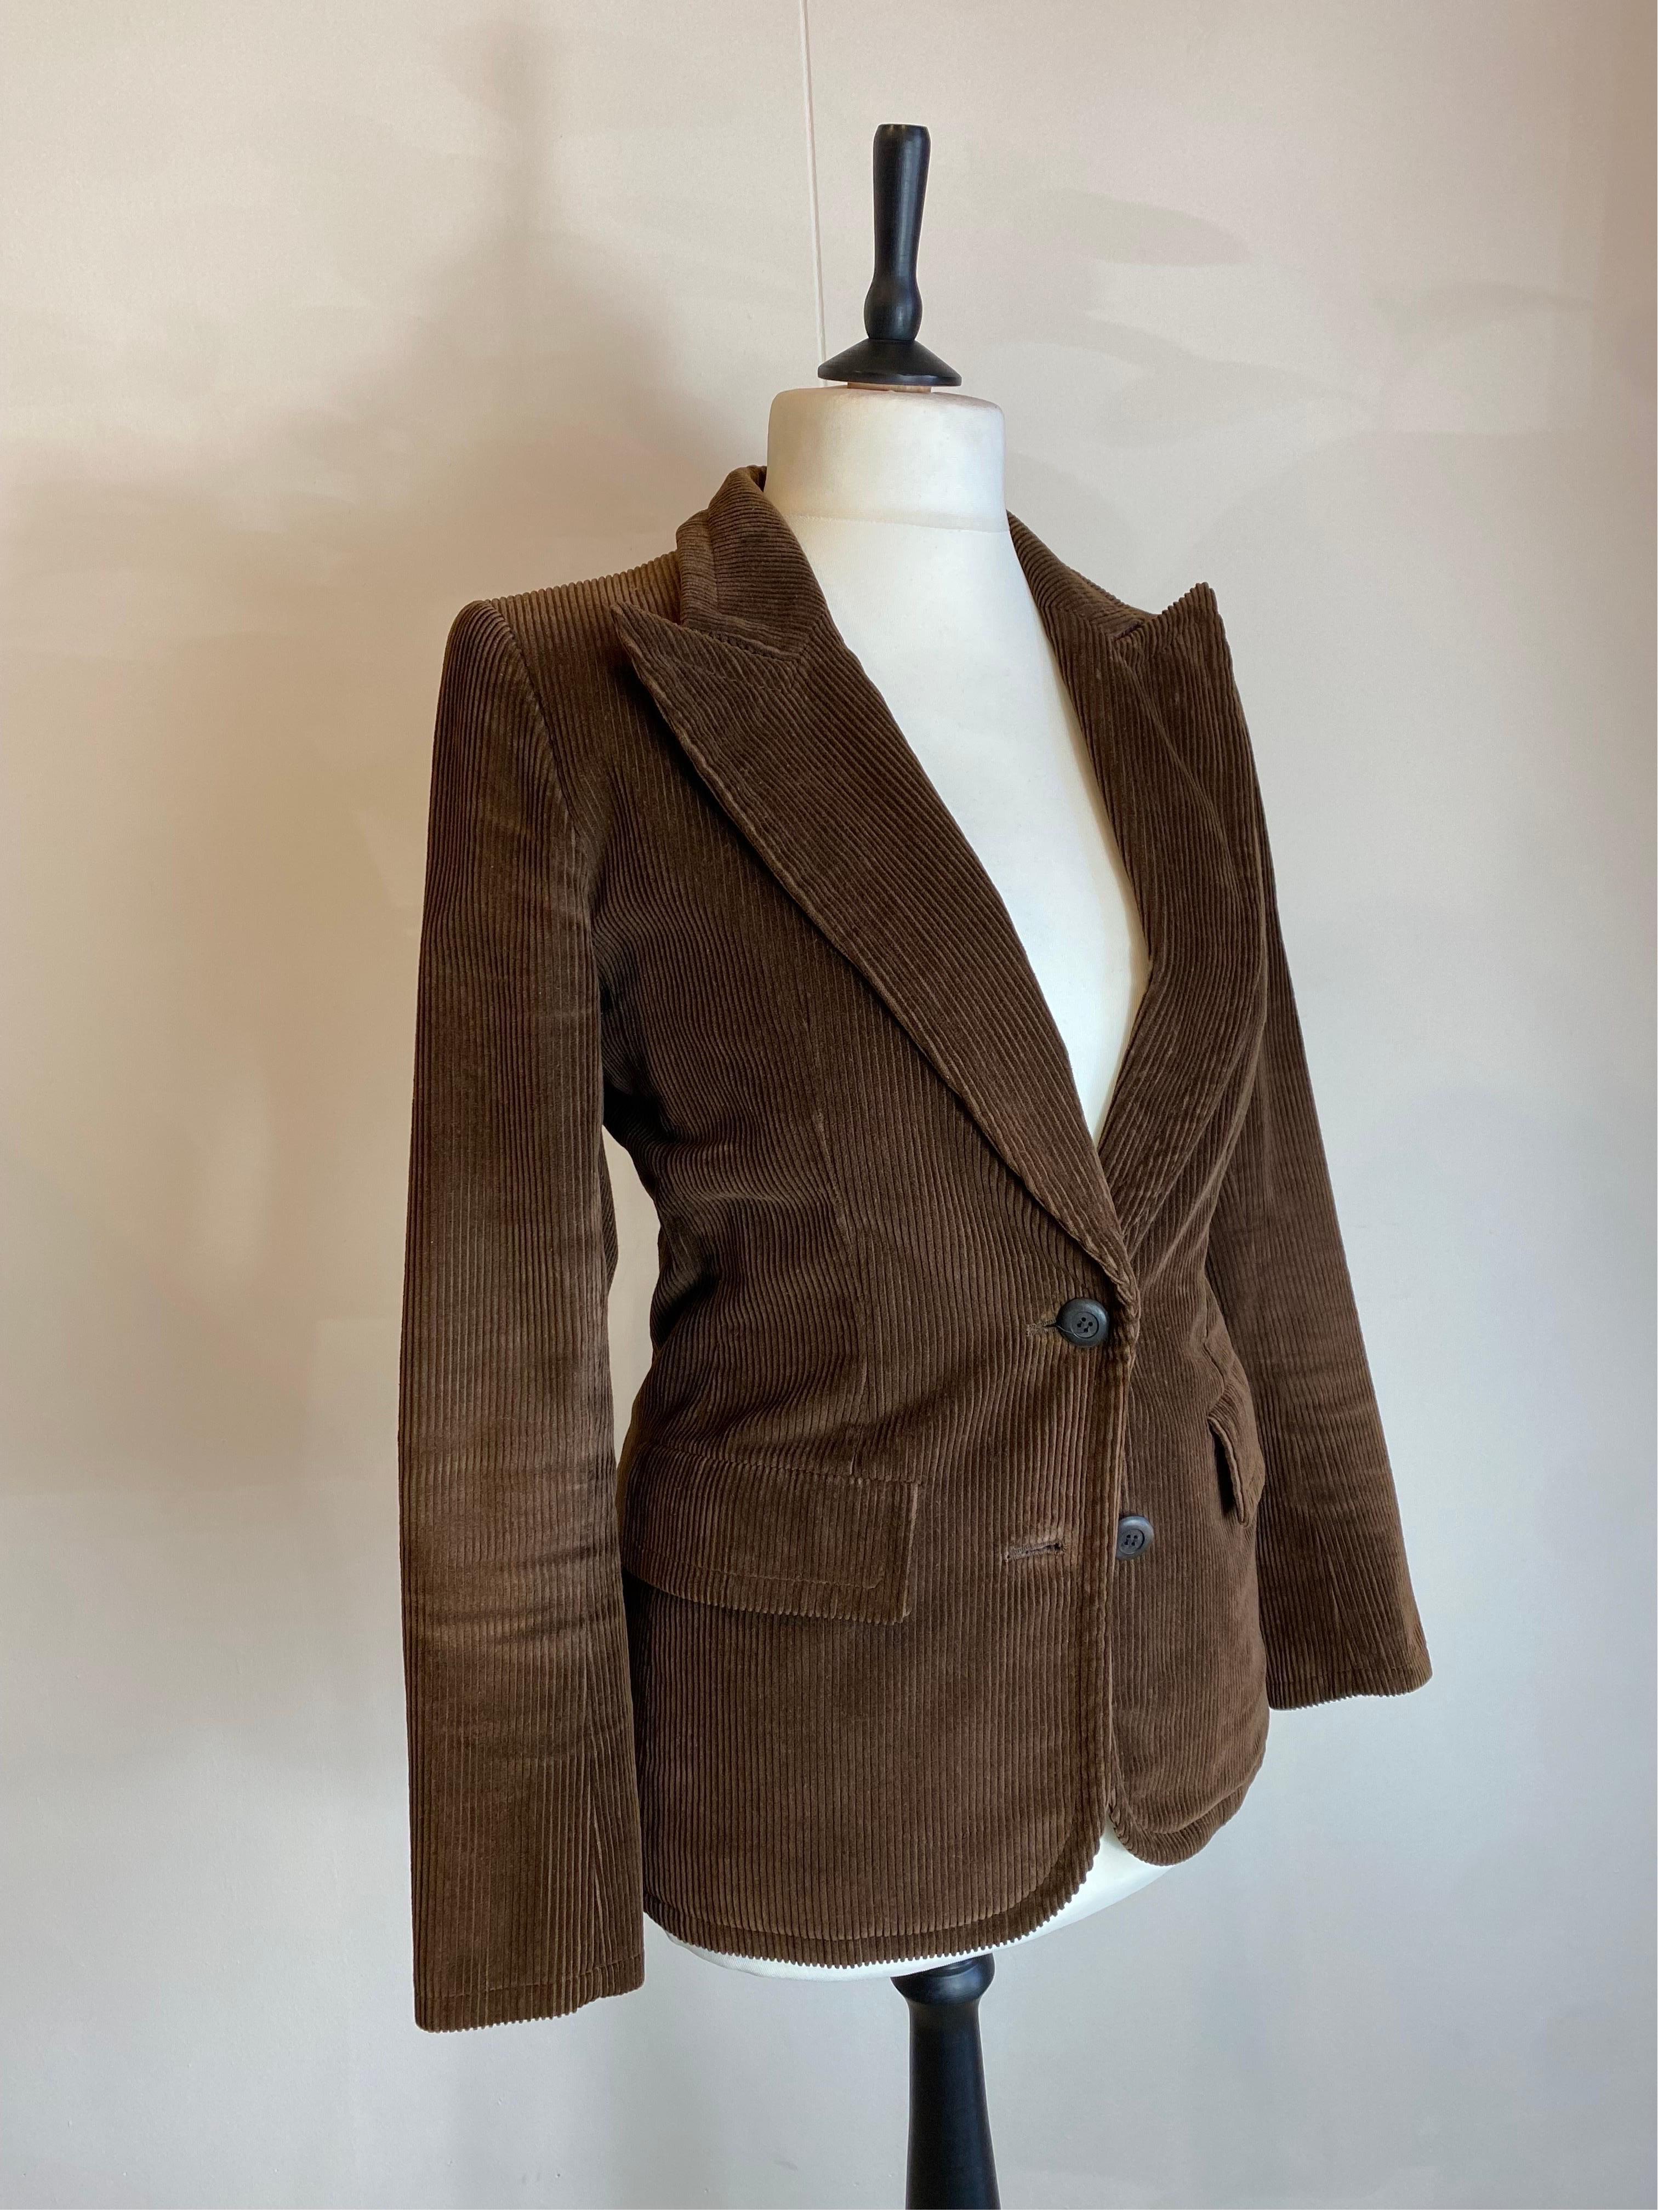 Yves Saint Laurent Vintage brown Jacket In Excellent Condition For Sale In Carnate, IT